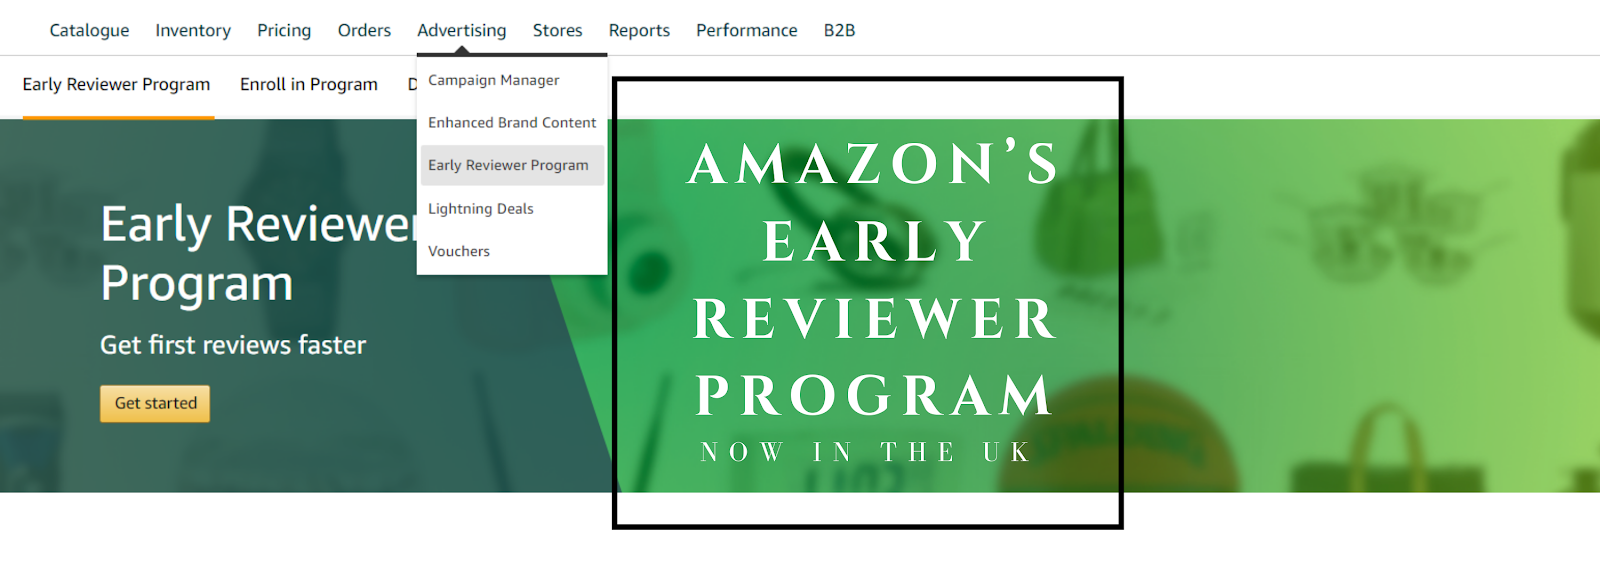 Amazon's New Early Reviewer Program (Beta)